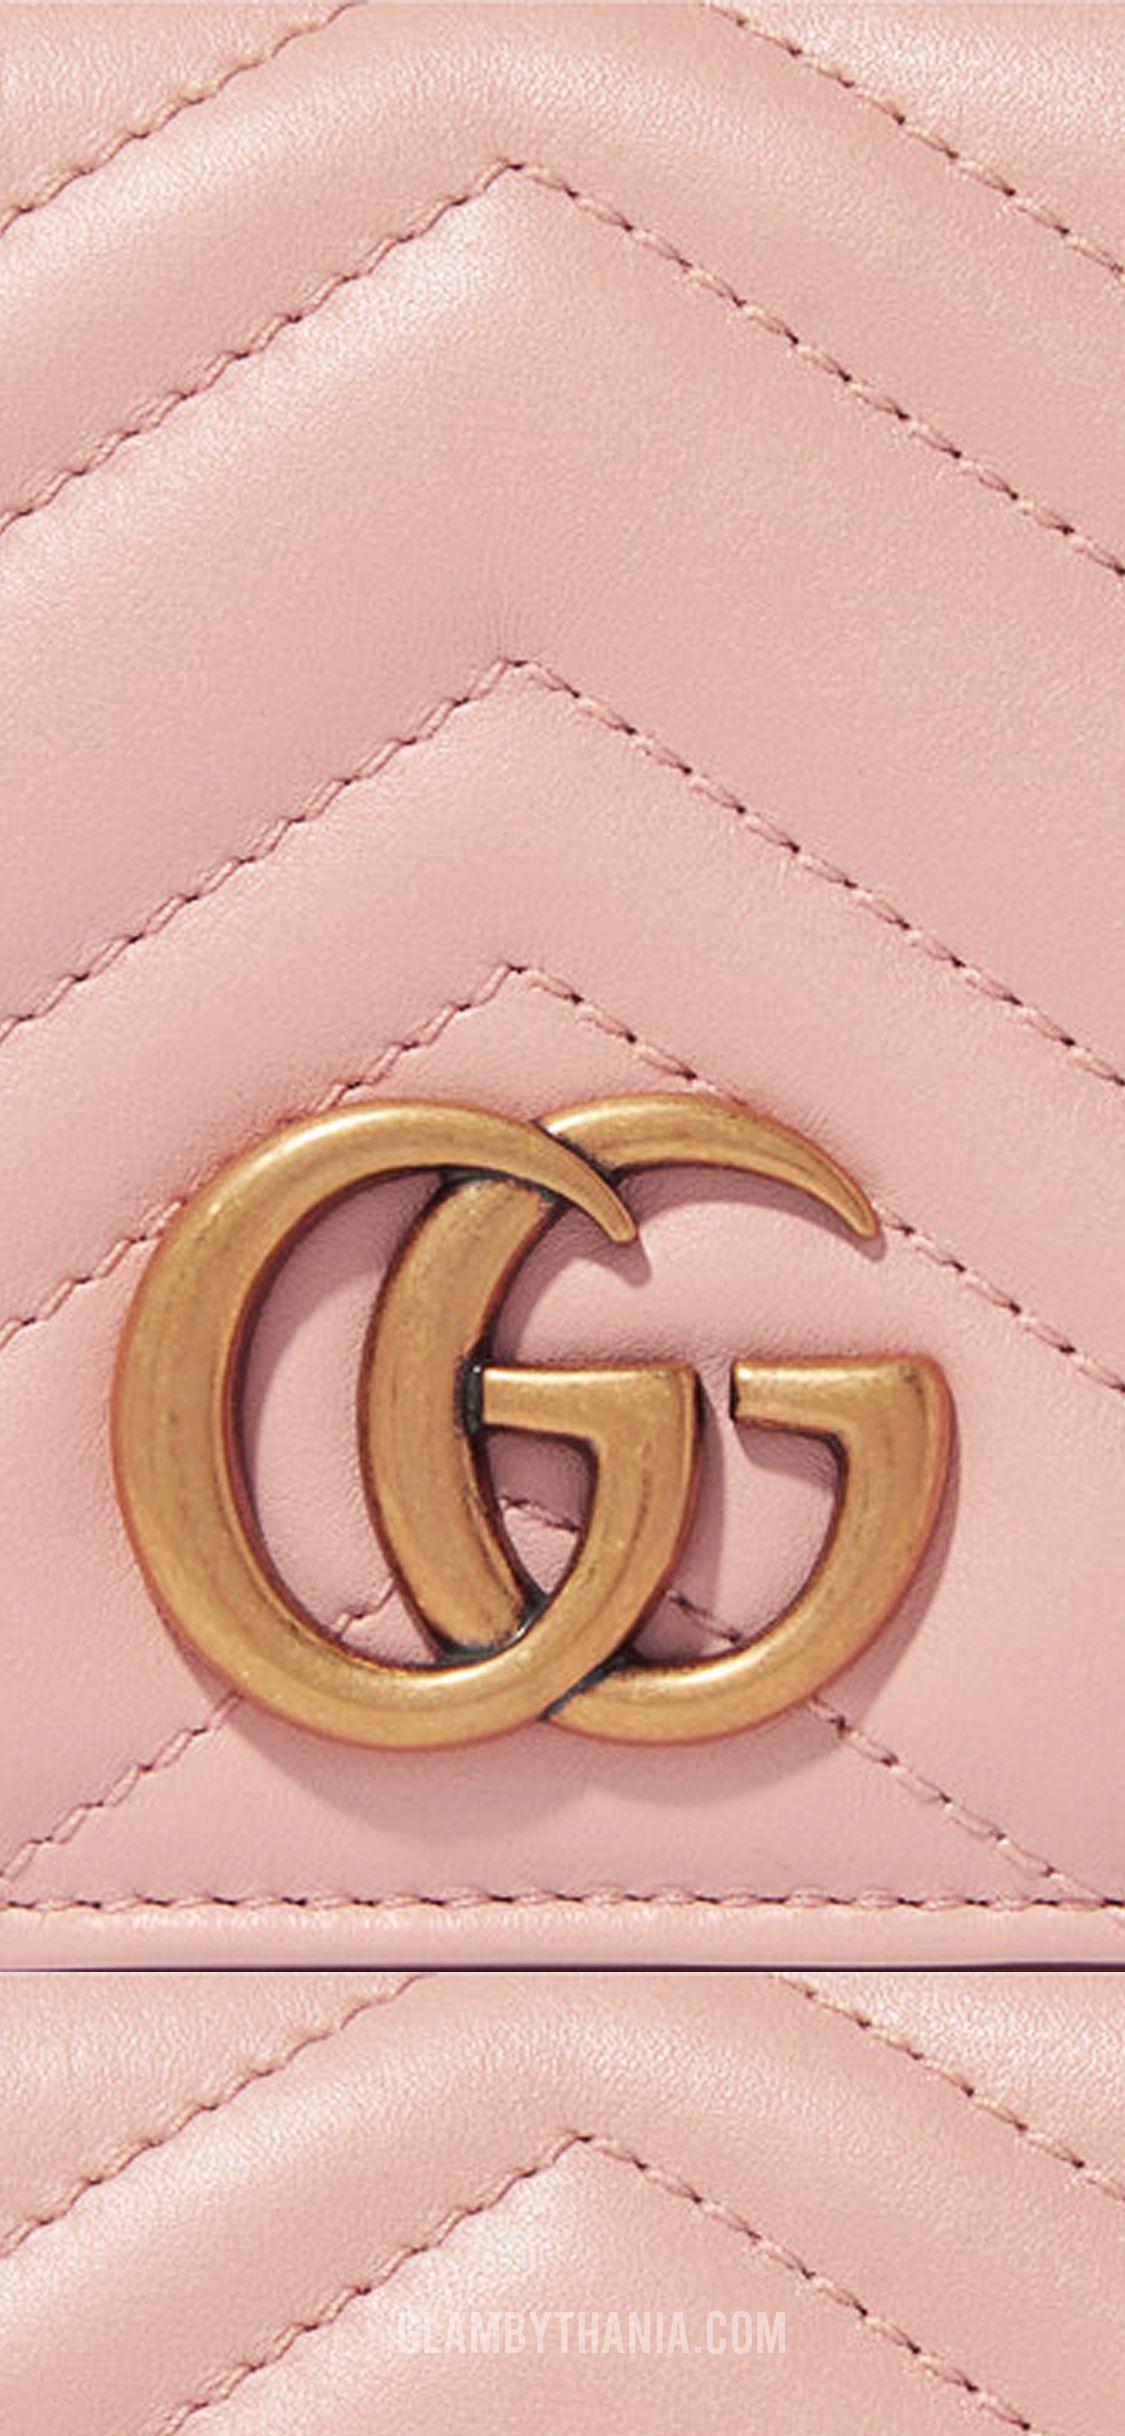 Gucci Girl Wallpapers  Wallpaper Cave